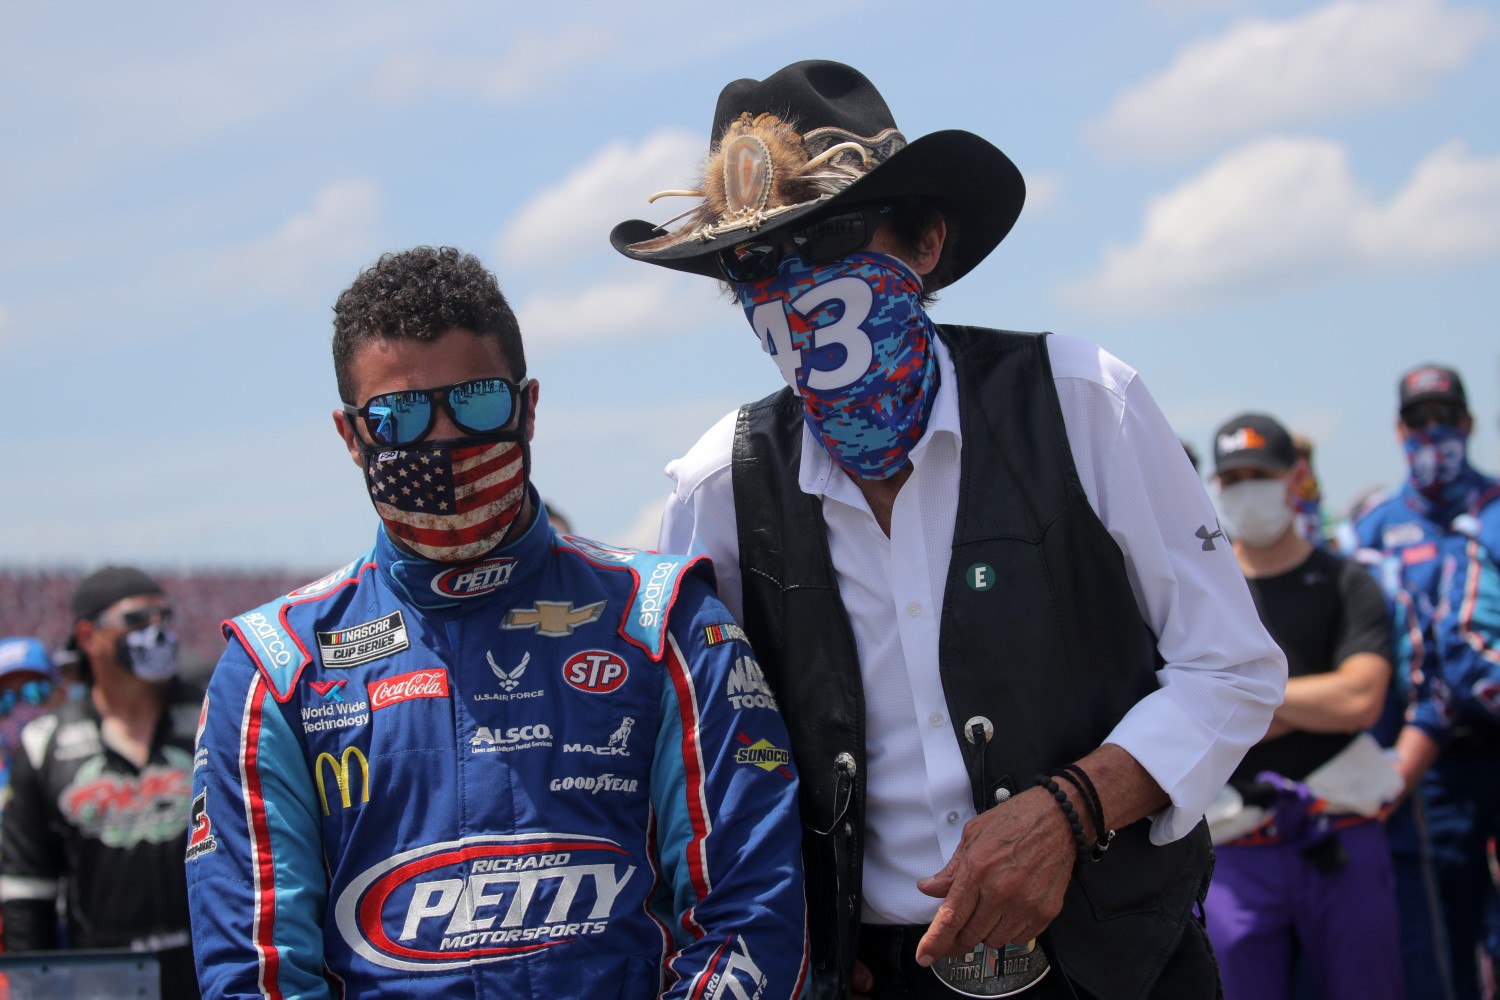 Even Richard Petty flew in special to play to the heartstrings Monday